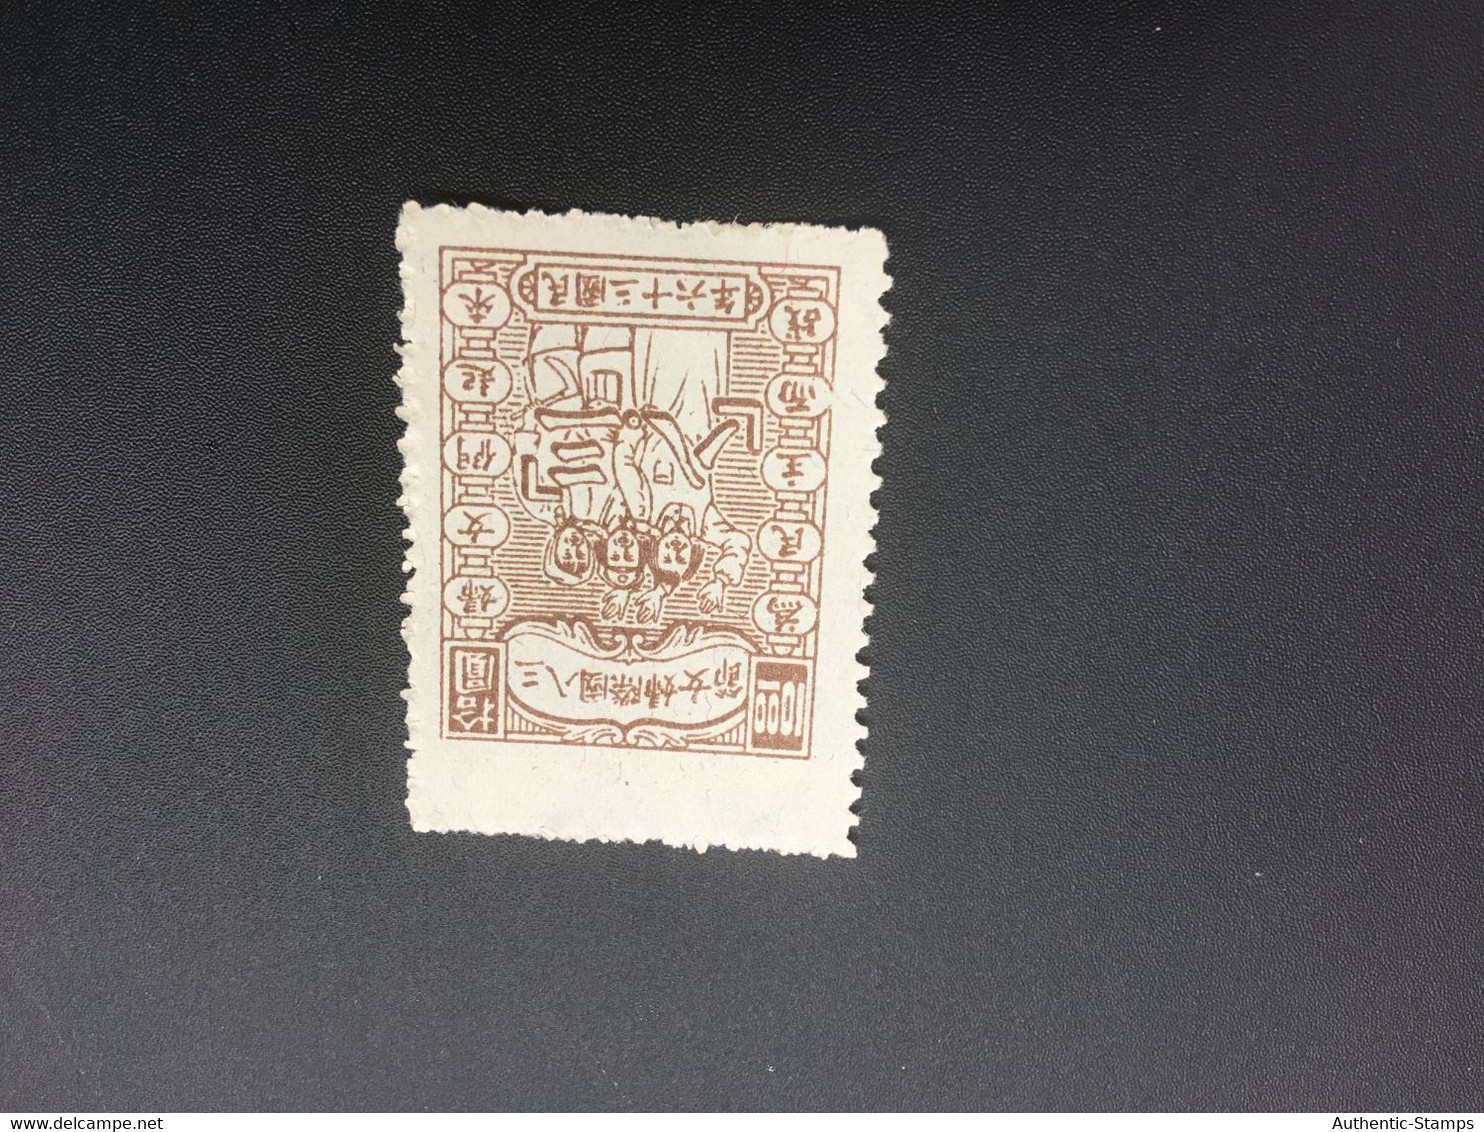 CHINA STAMP, UnUSED, TIMBRO, STEMPEL, CINA, CHINE, LIST 6159 - Chine Du Nord-Est 1946-48